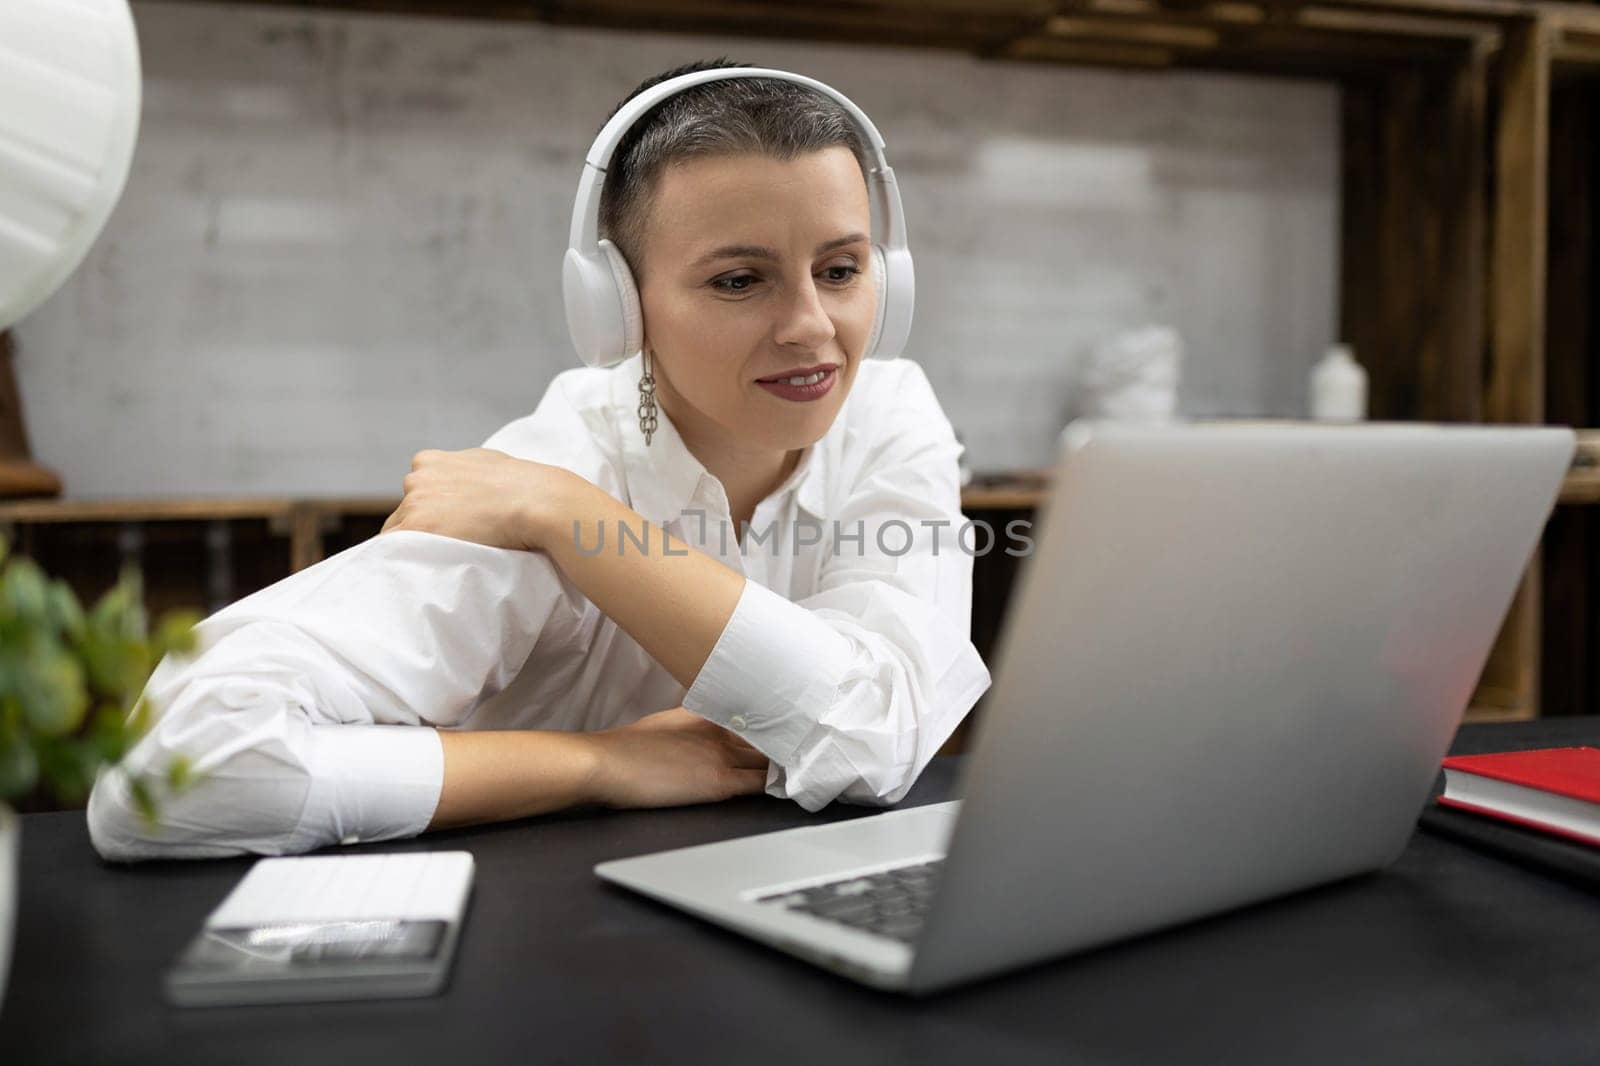 Business woman watching a webinar in headphones on a laptop while sitting at a table in the office.